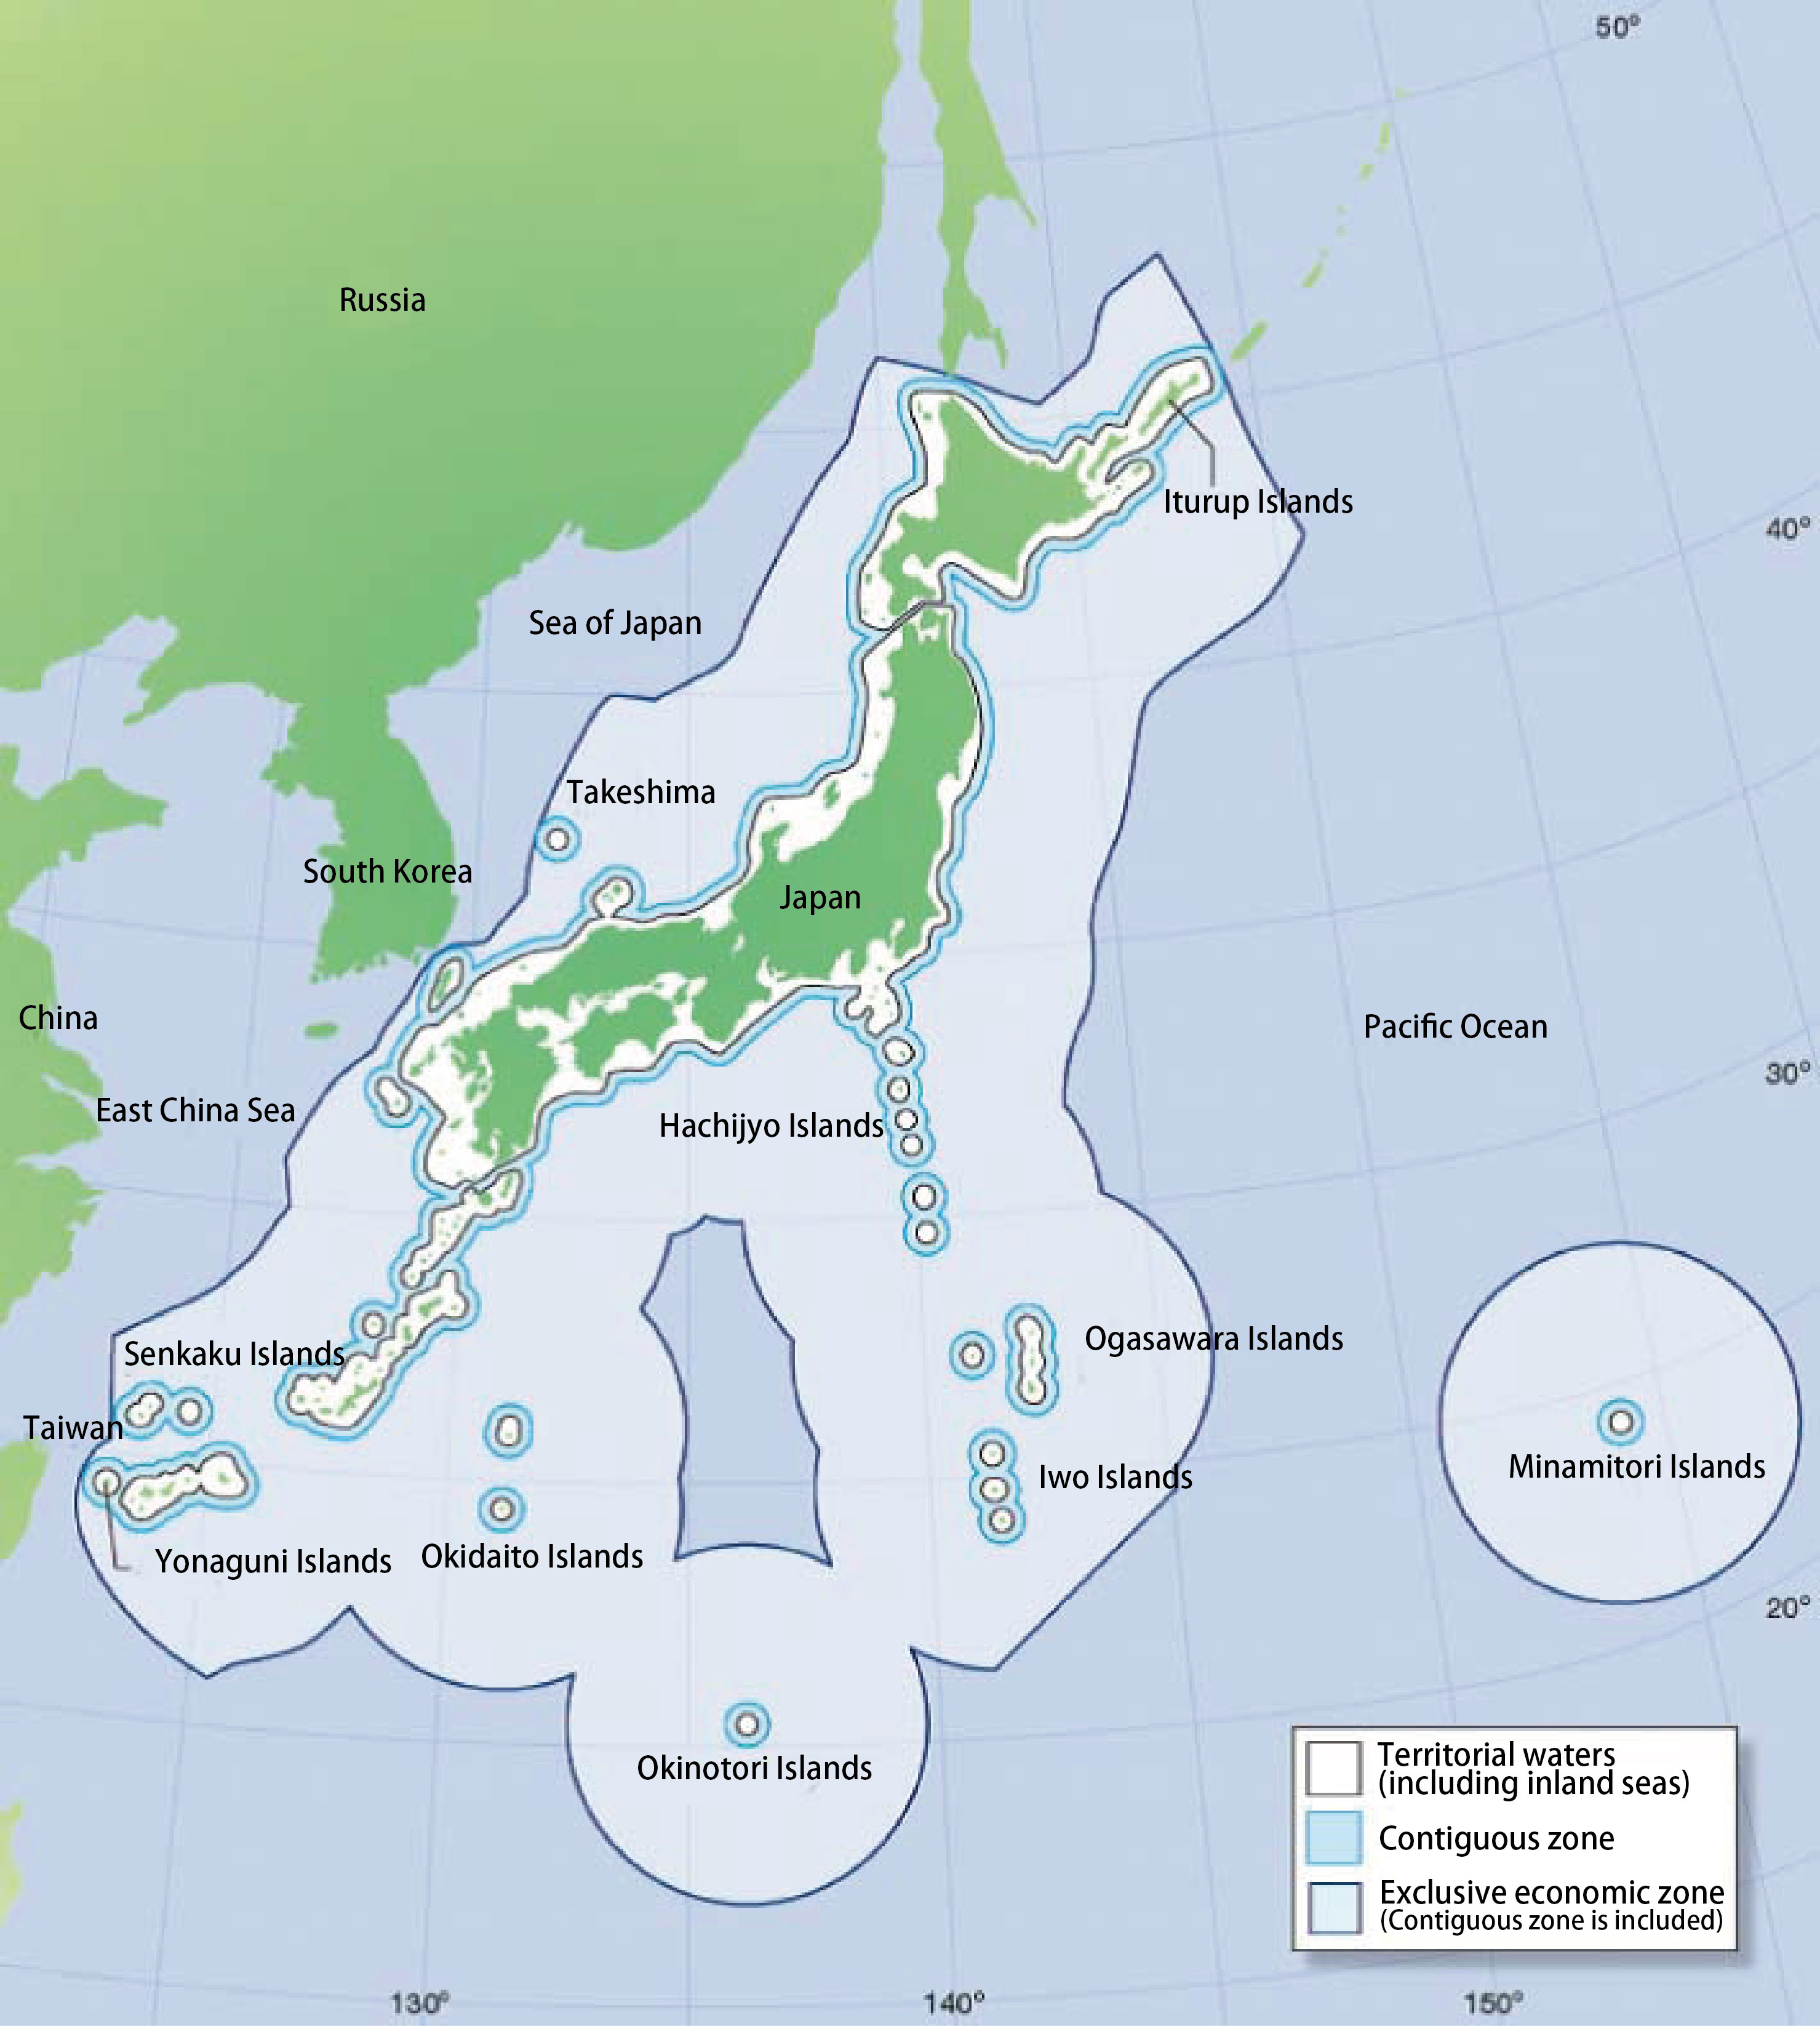 Territorial seas of Japan is about 430,000 km2